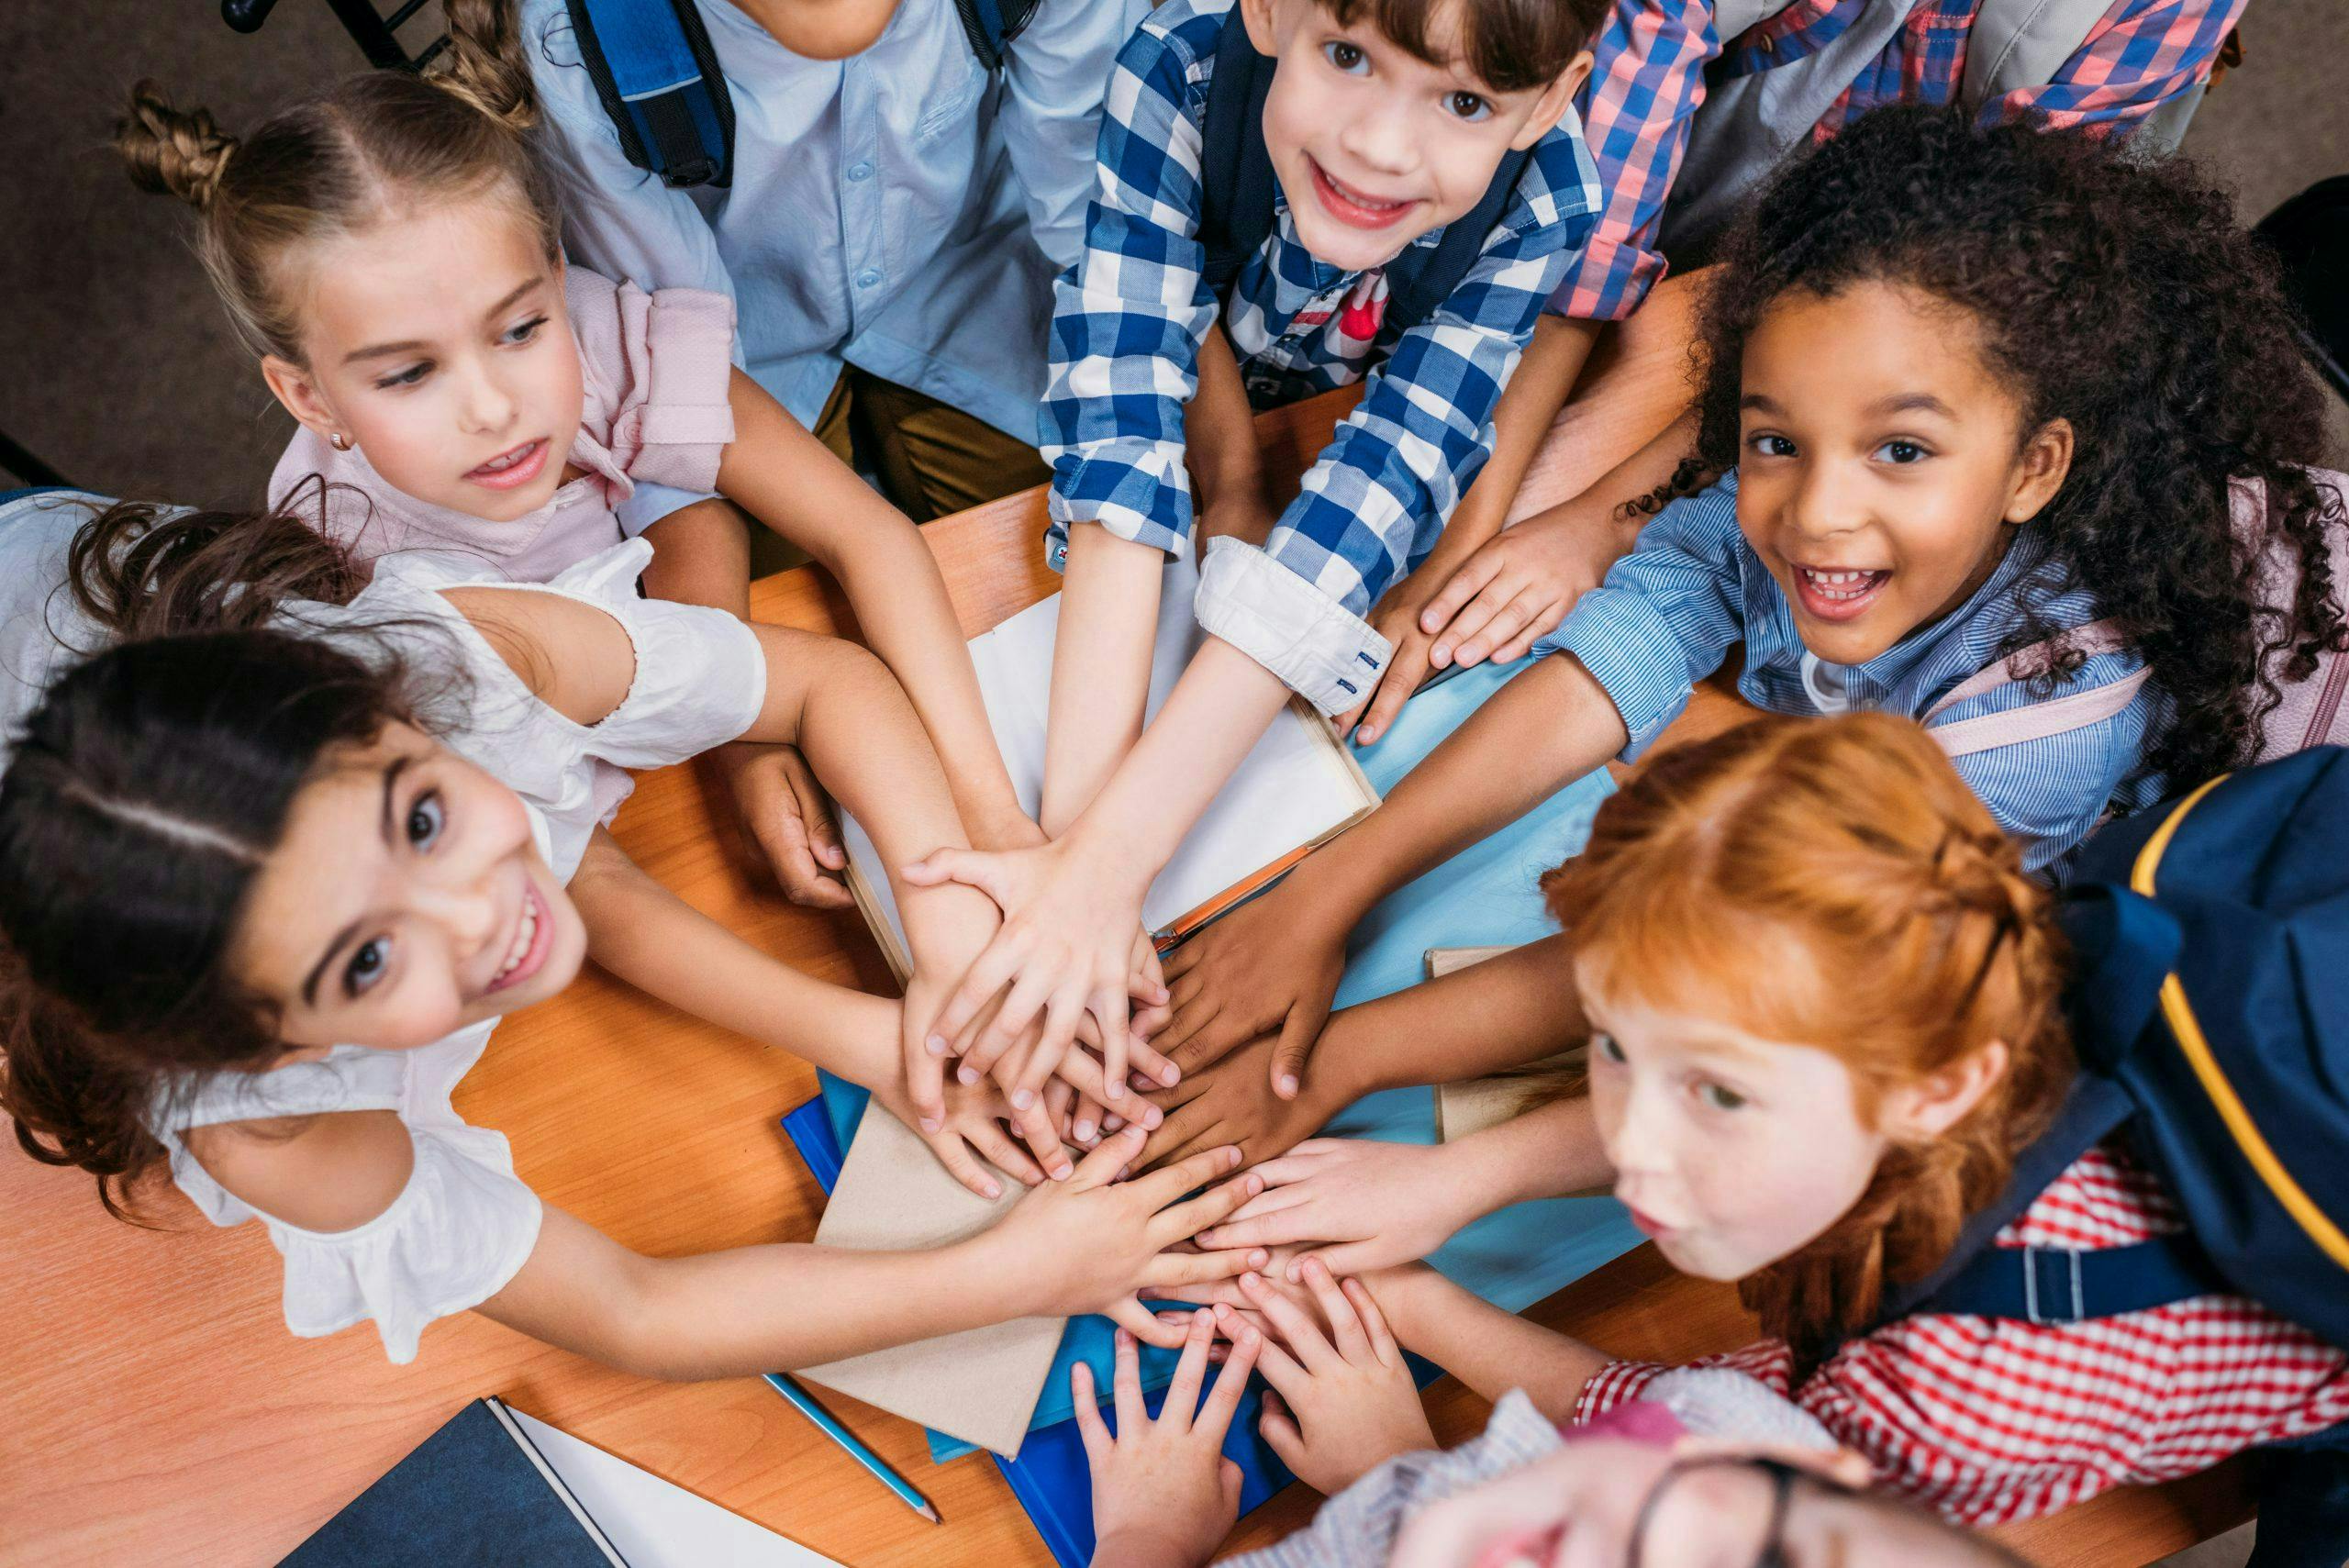 Children place their hands together in a group gesture atop a wooden desk crowded with books and notebooks, displaying unity and teamwork in a classroom setting.